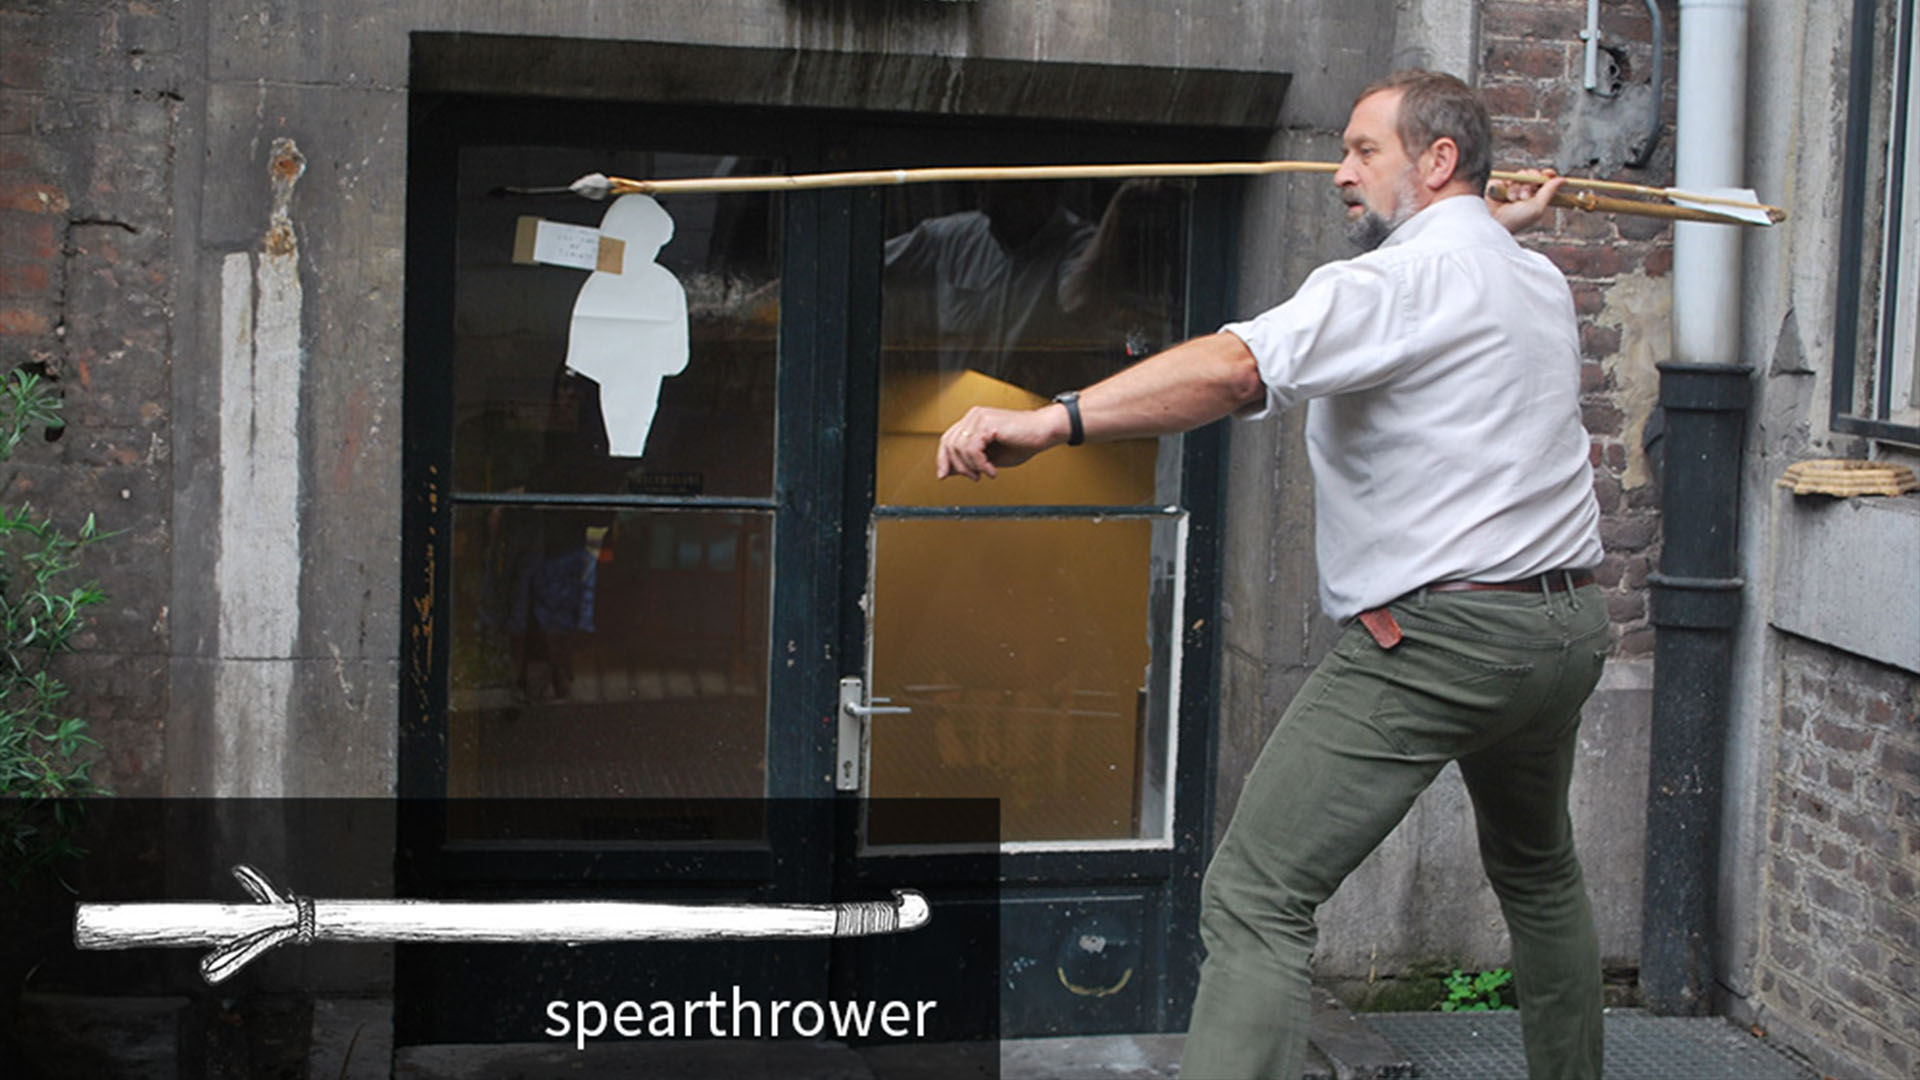 A man in a white shirt and green pants stands with a large spear about to throw it with a brick wall background.